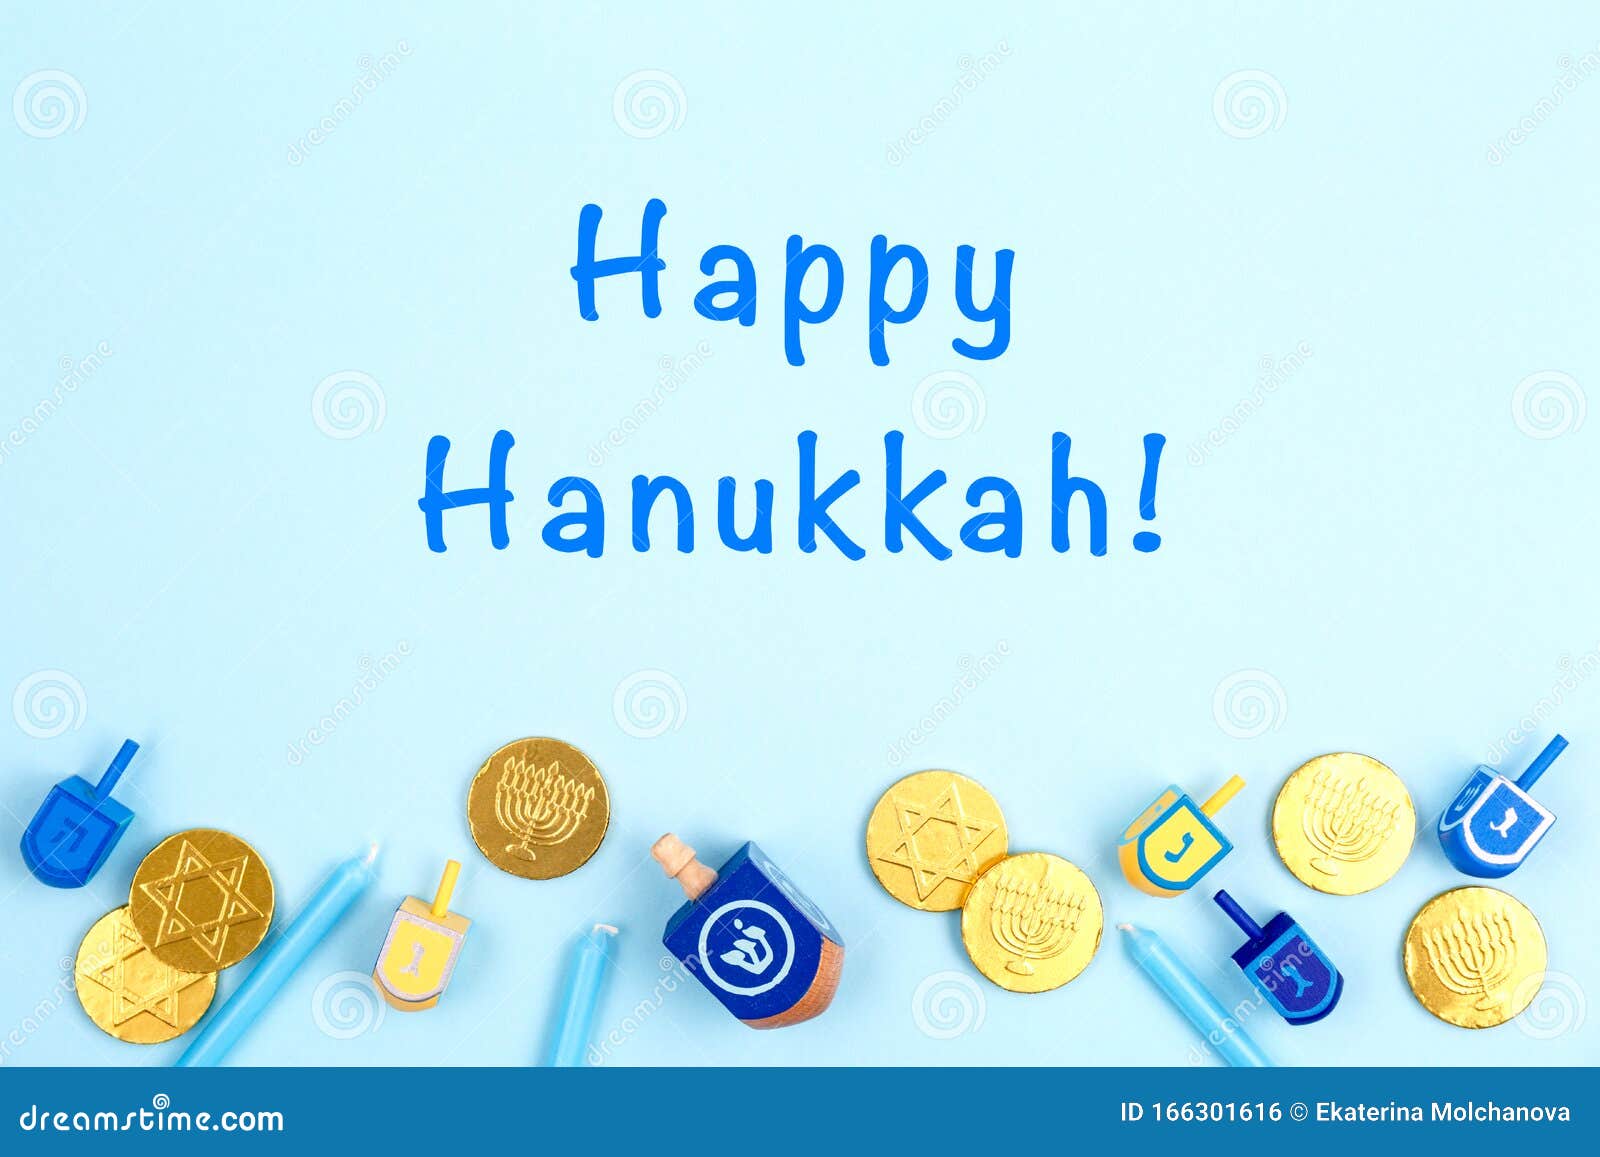 blue background with multicolor dreidels, menora candles and chocolate coins and happy hanukkah wording. hanukkah and